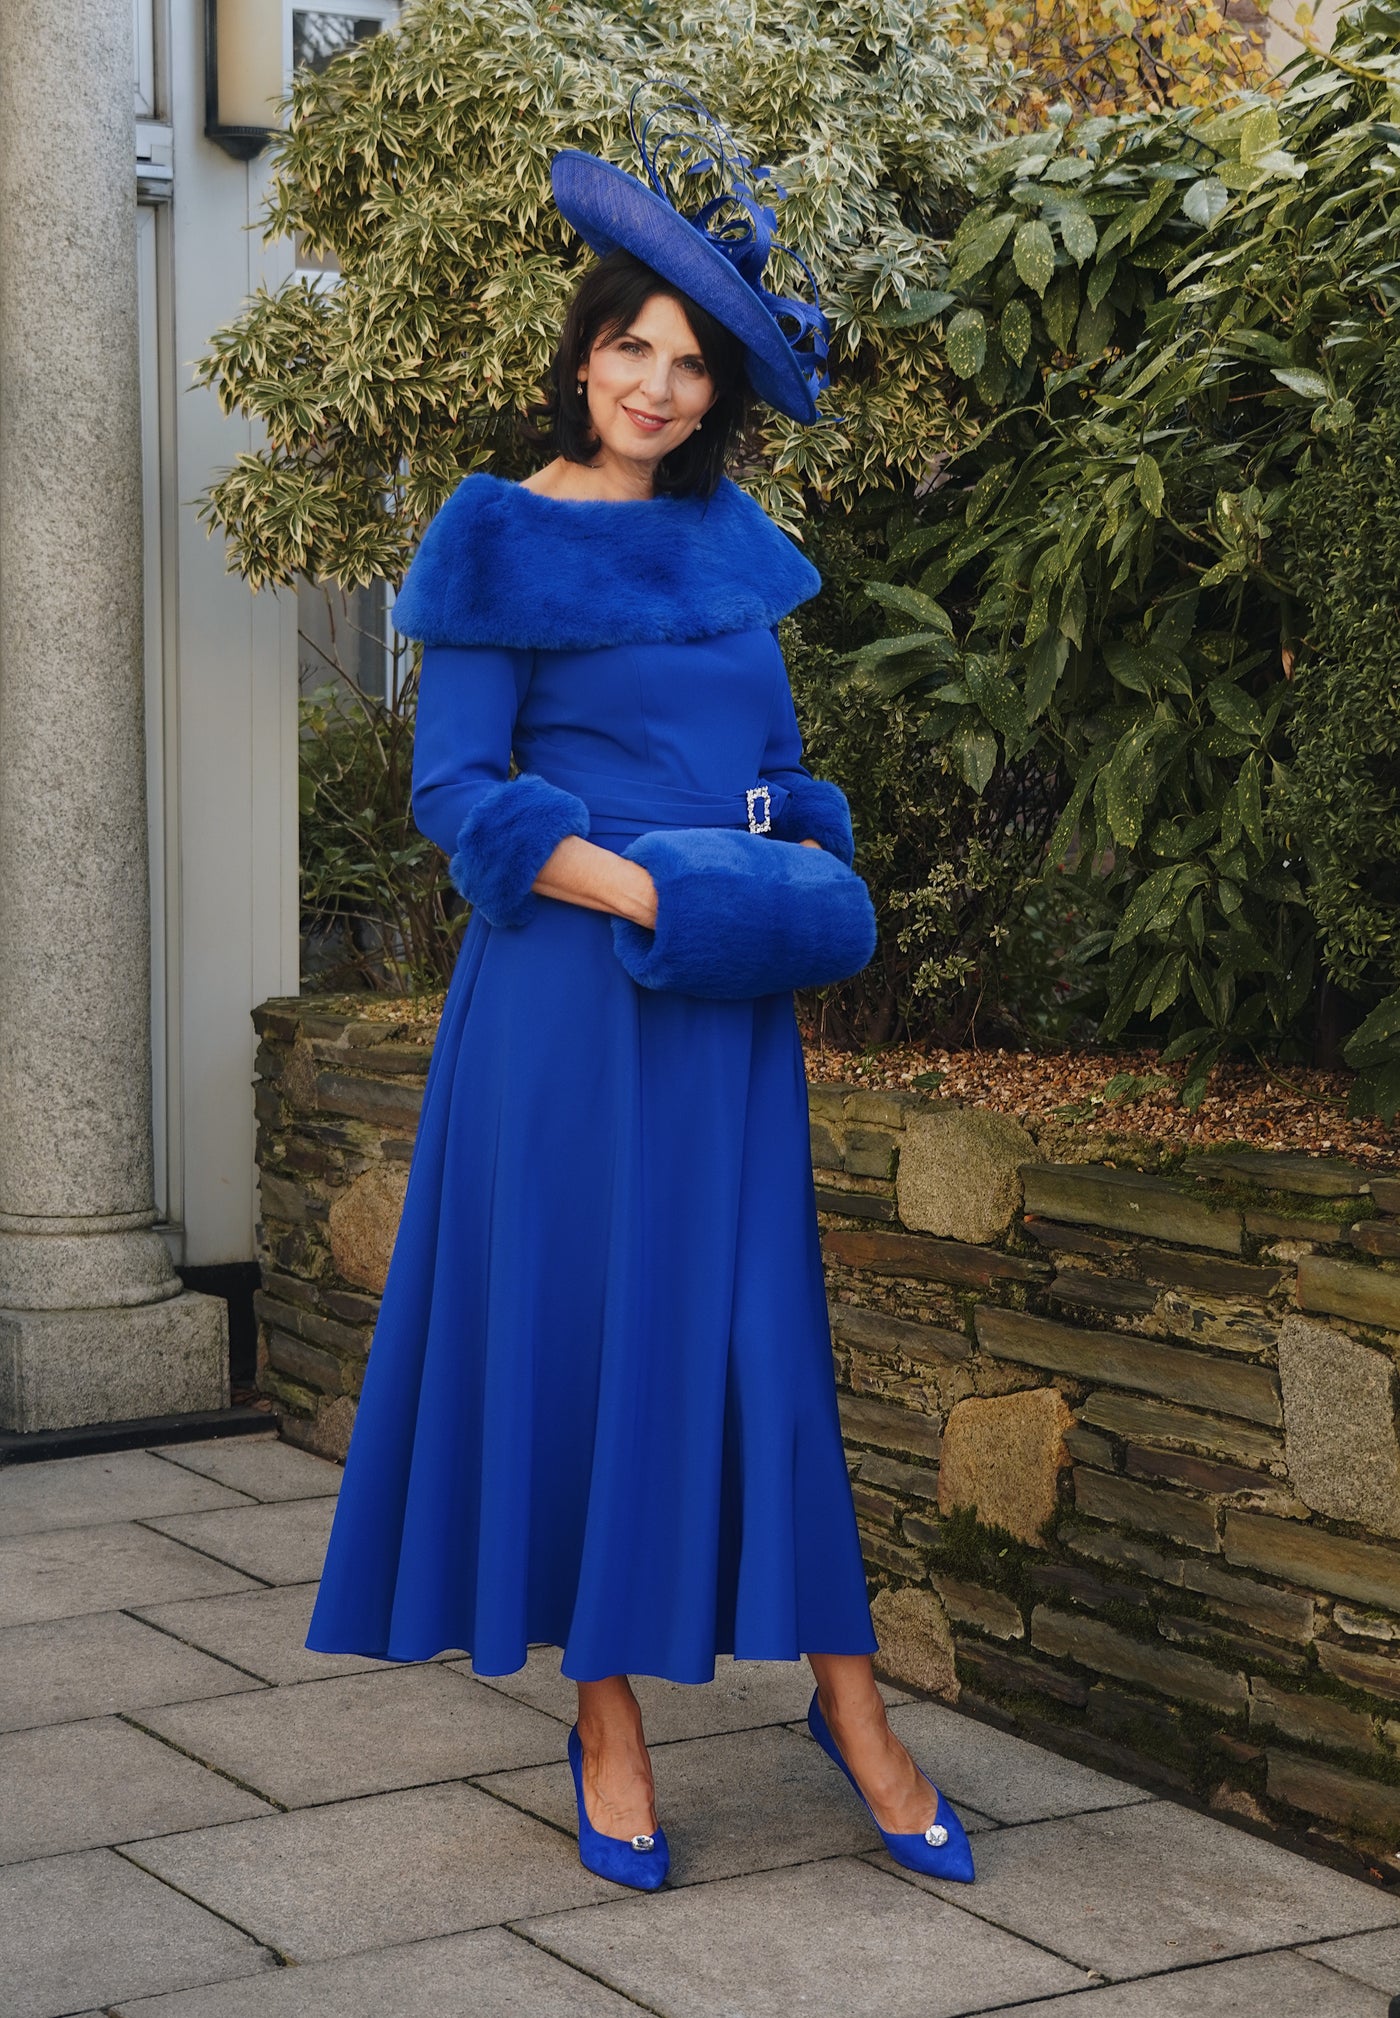 Royal Blue Dress With Faux Fur Accessories